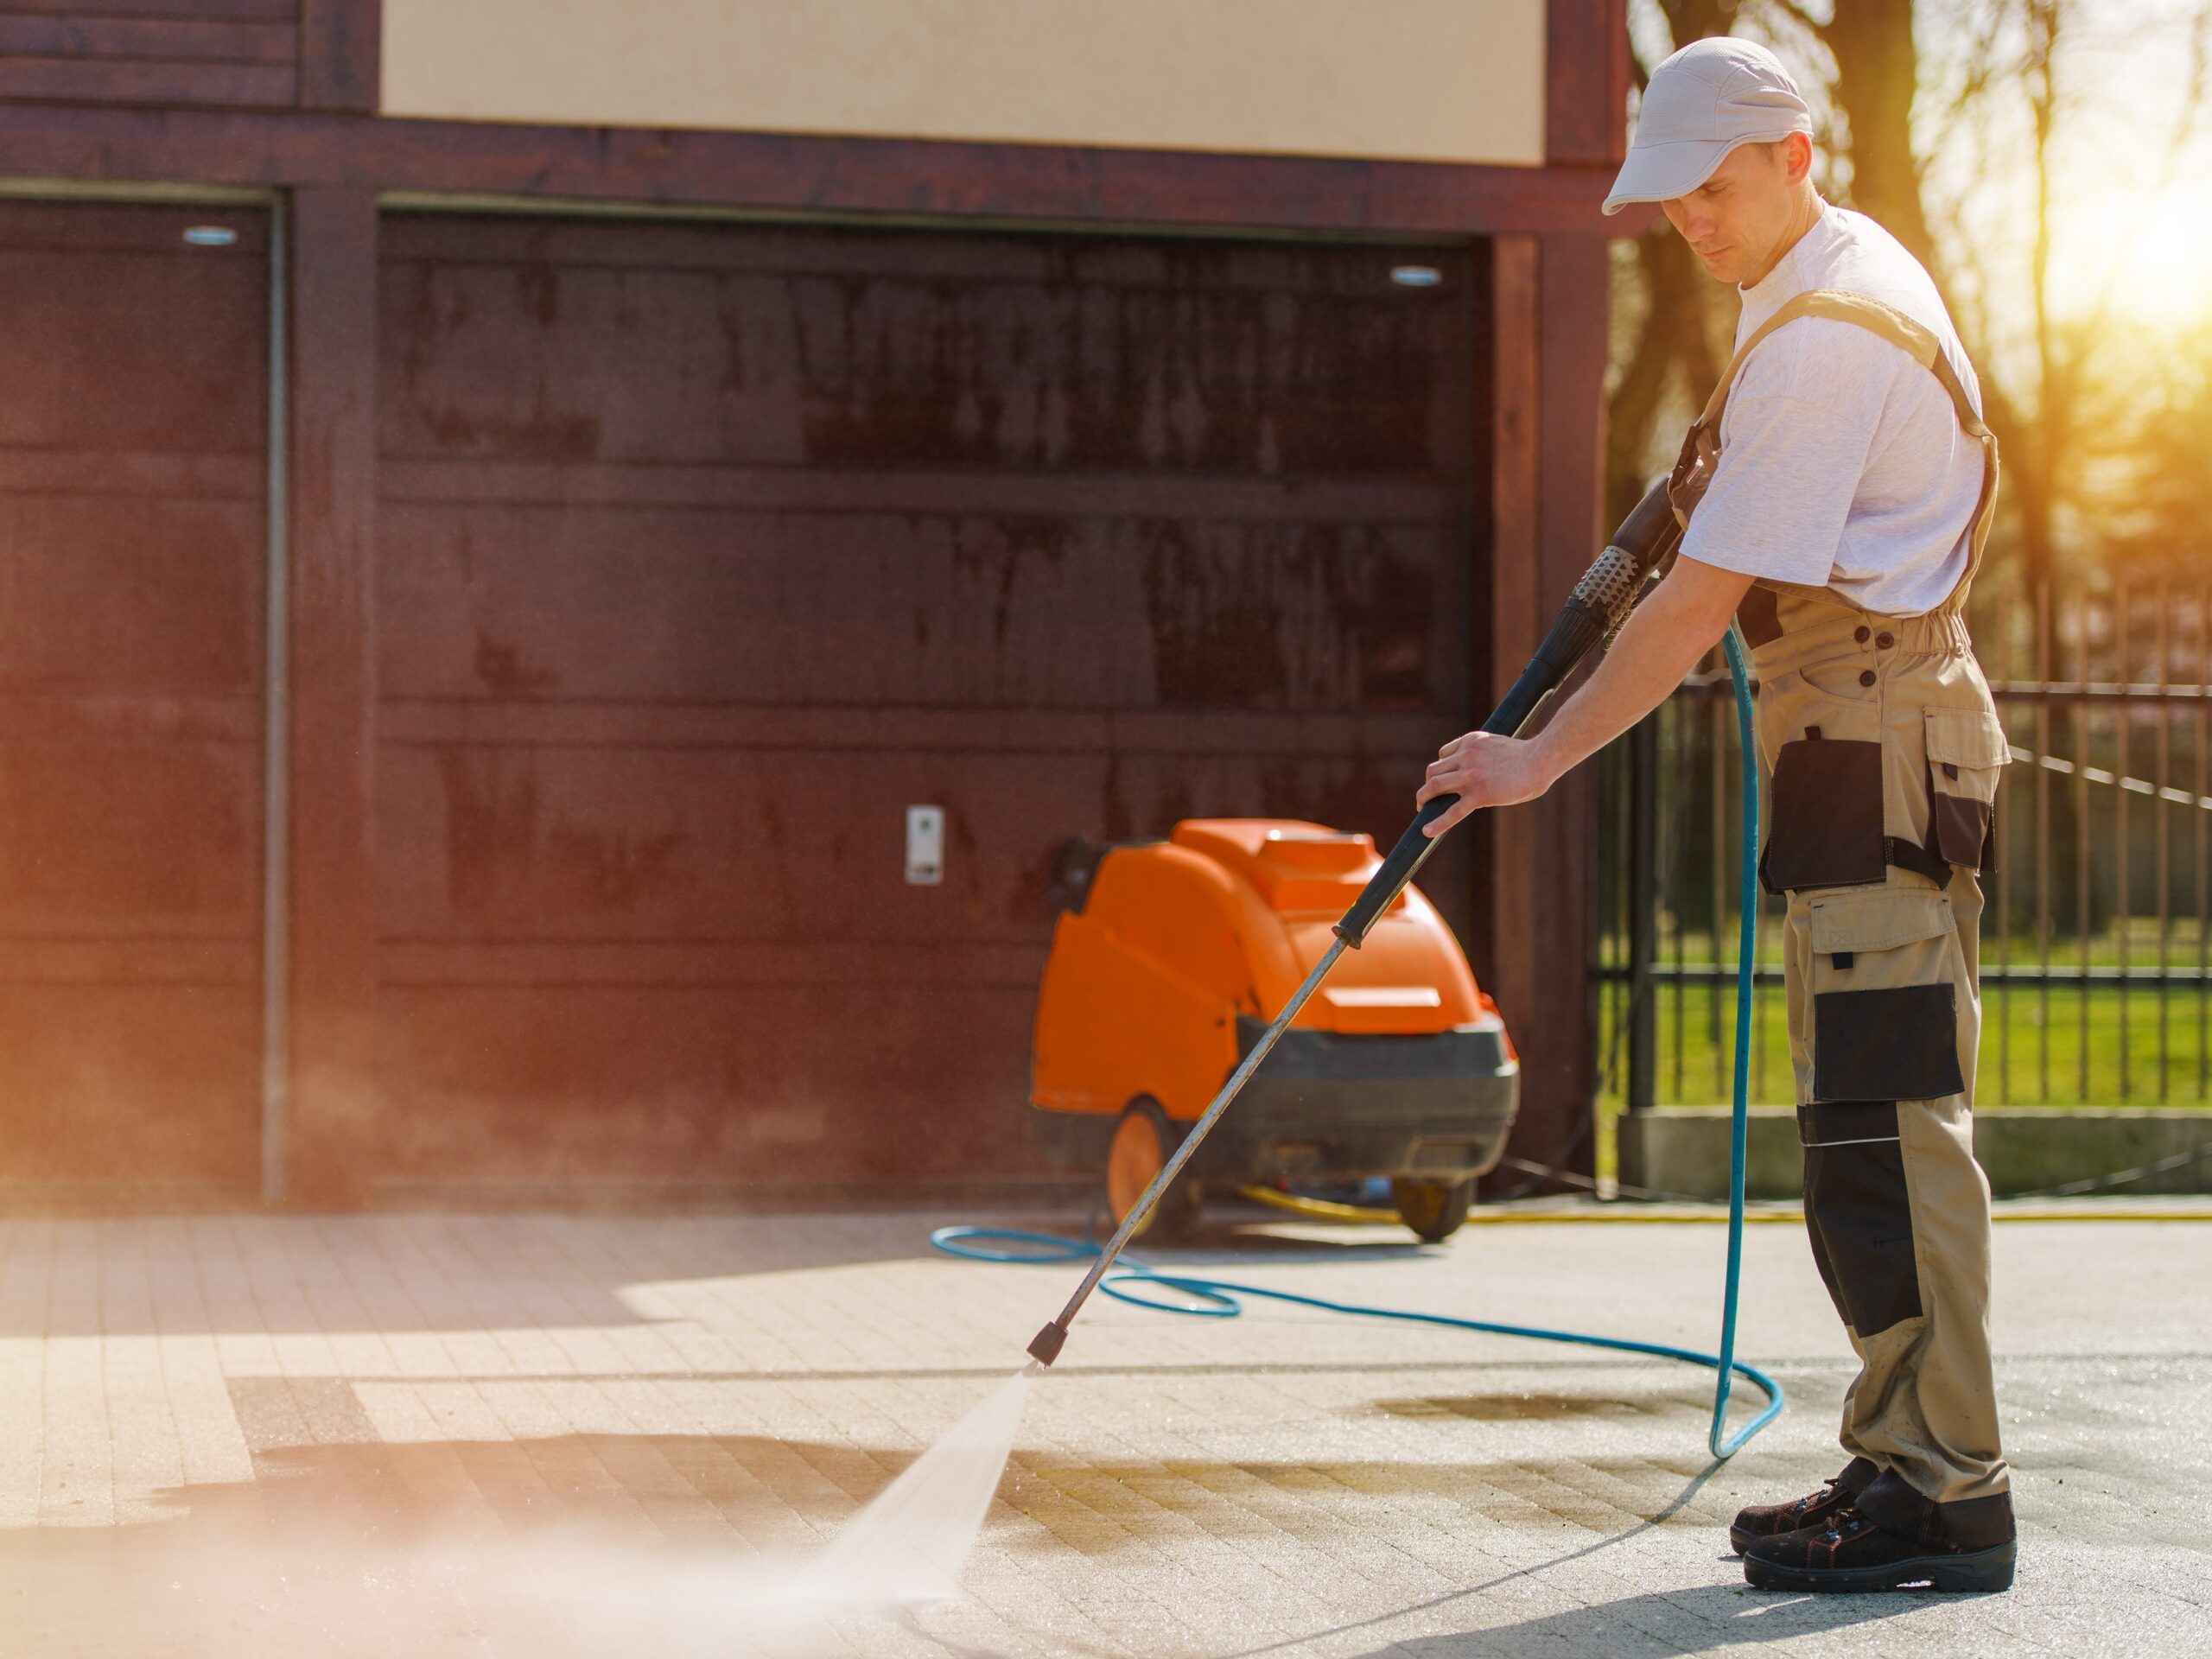 Caucasian Male at Work Cleaning Residential Brick Road Using High Pressure Water Cleaning System Machine